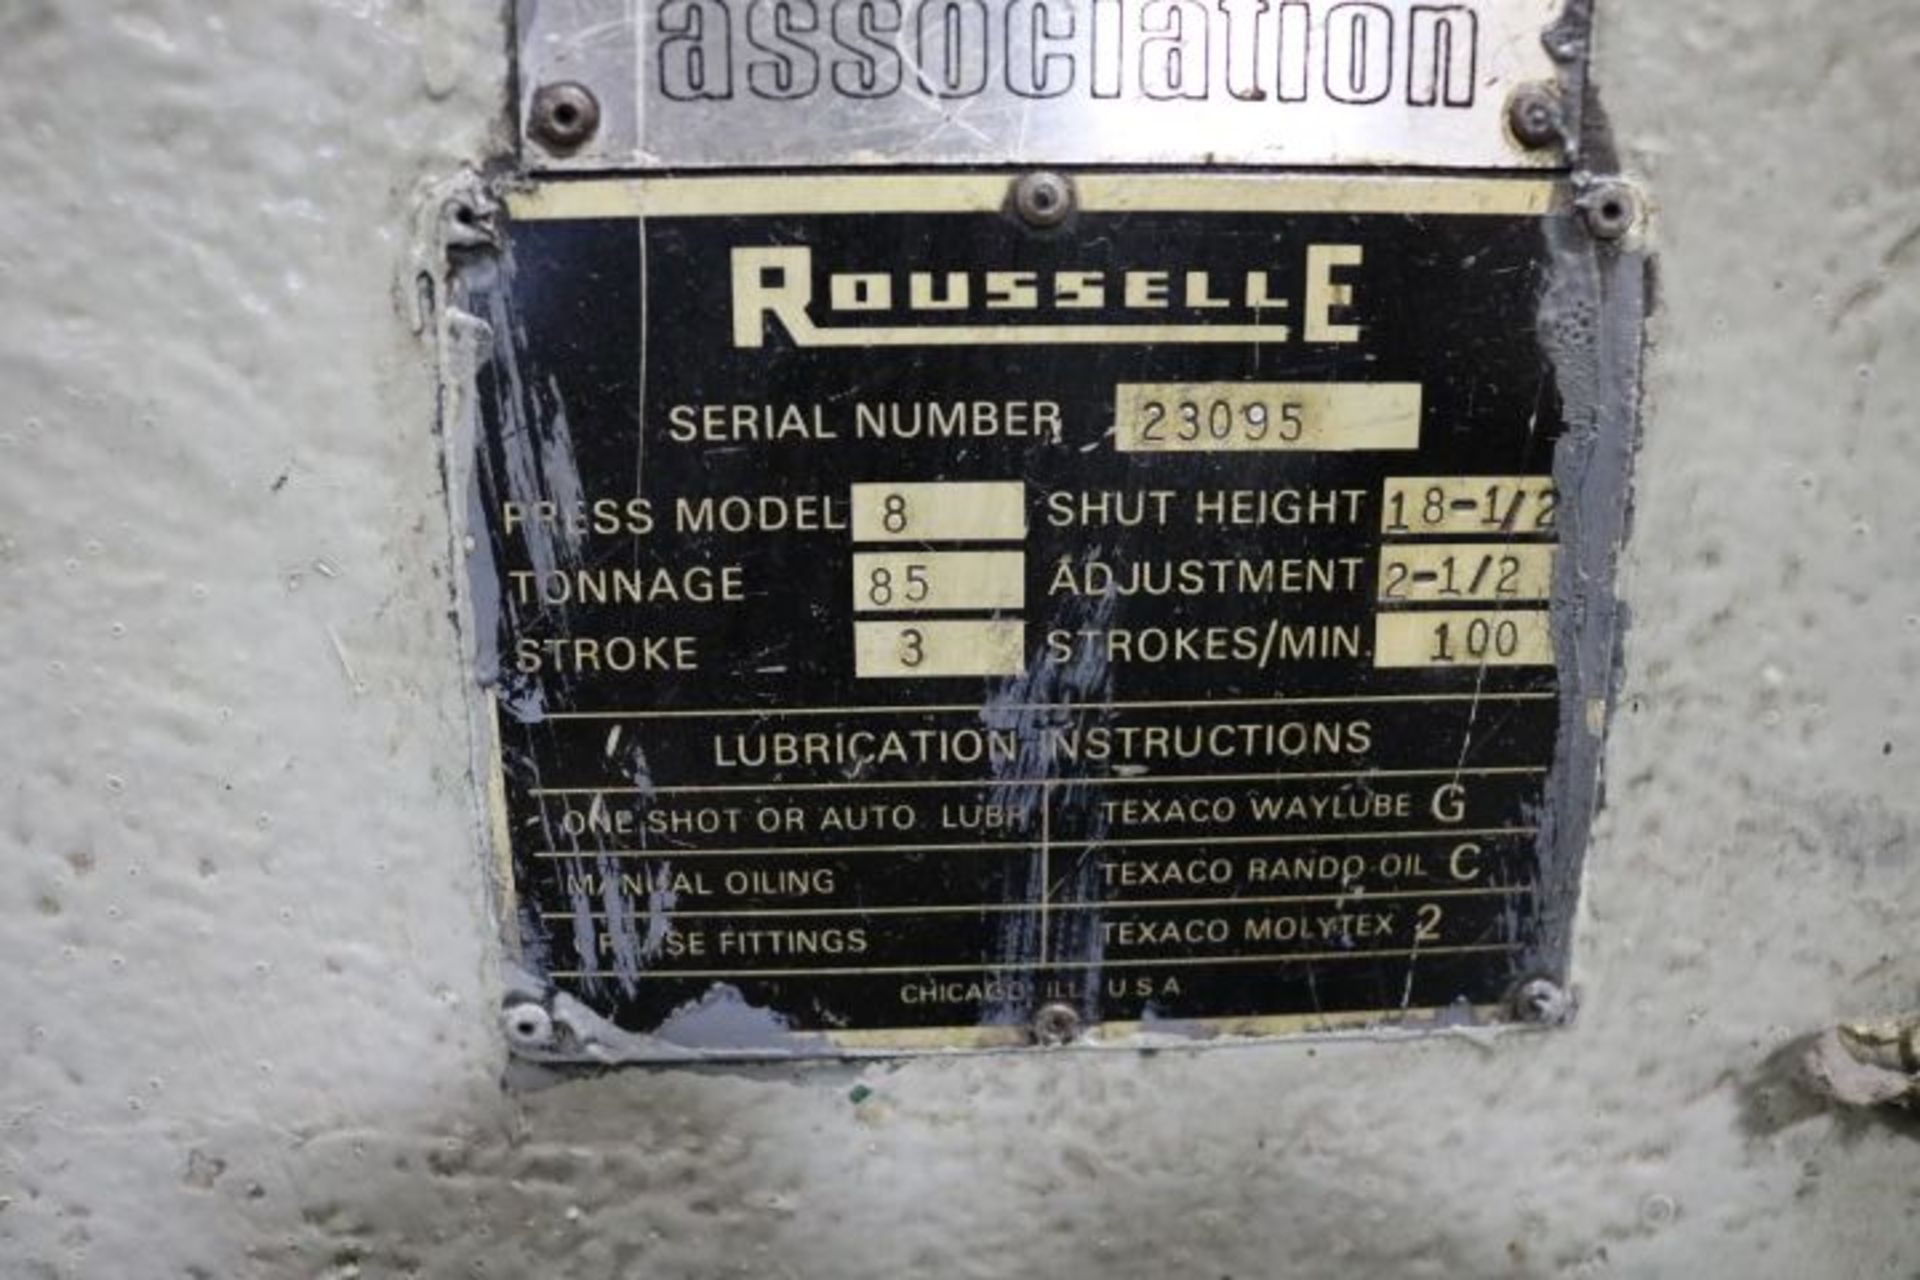 ROUSSELLE PUNCH PRESS, MODEL #8, 85 TON, S/N 23095 - Image 6 of 6